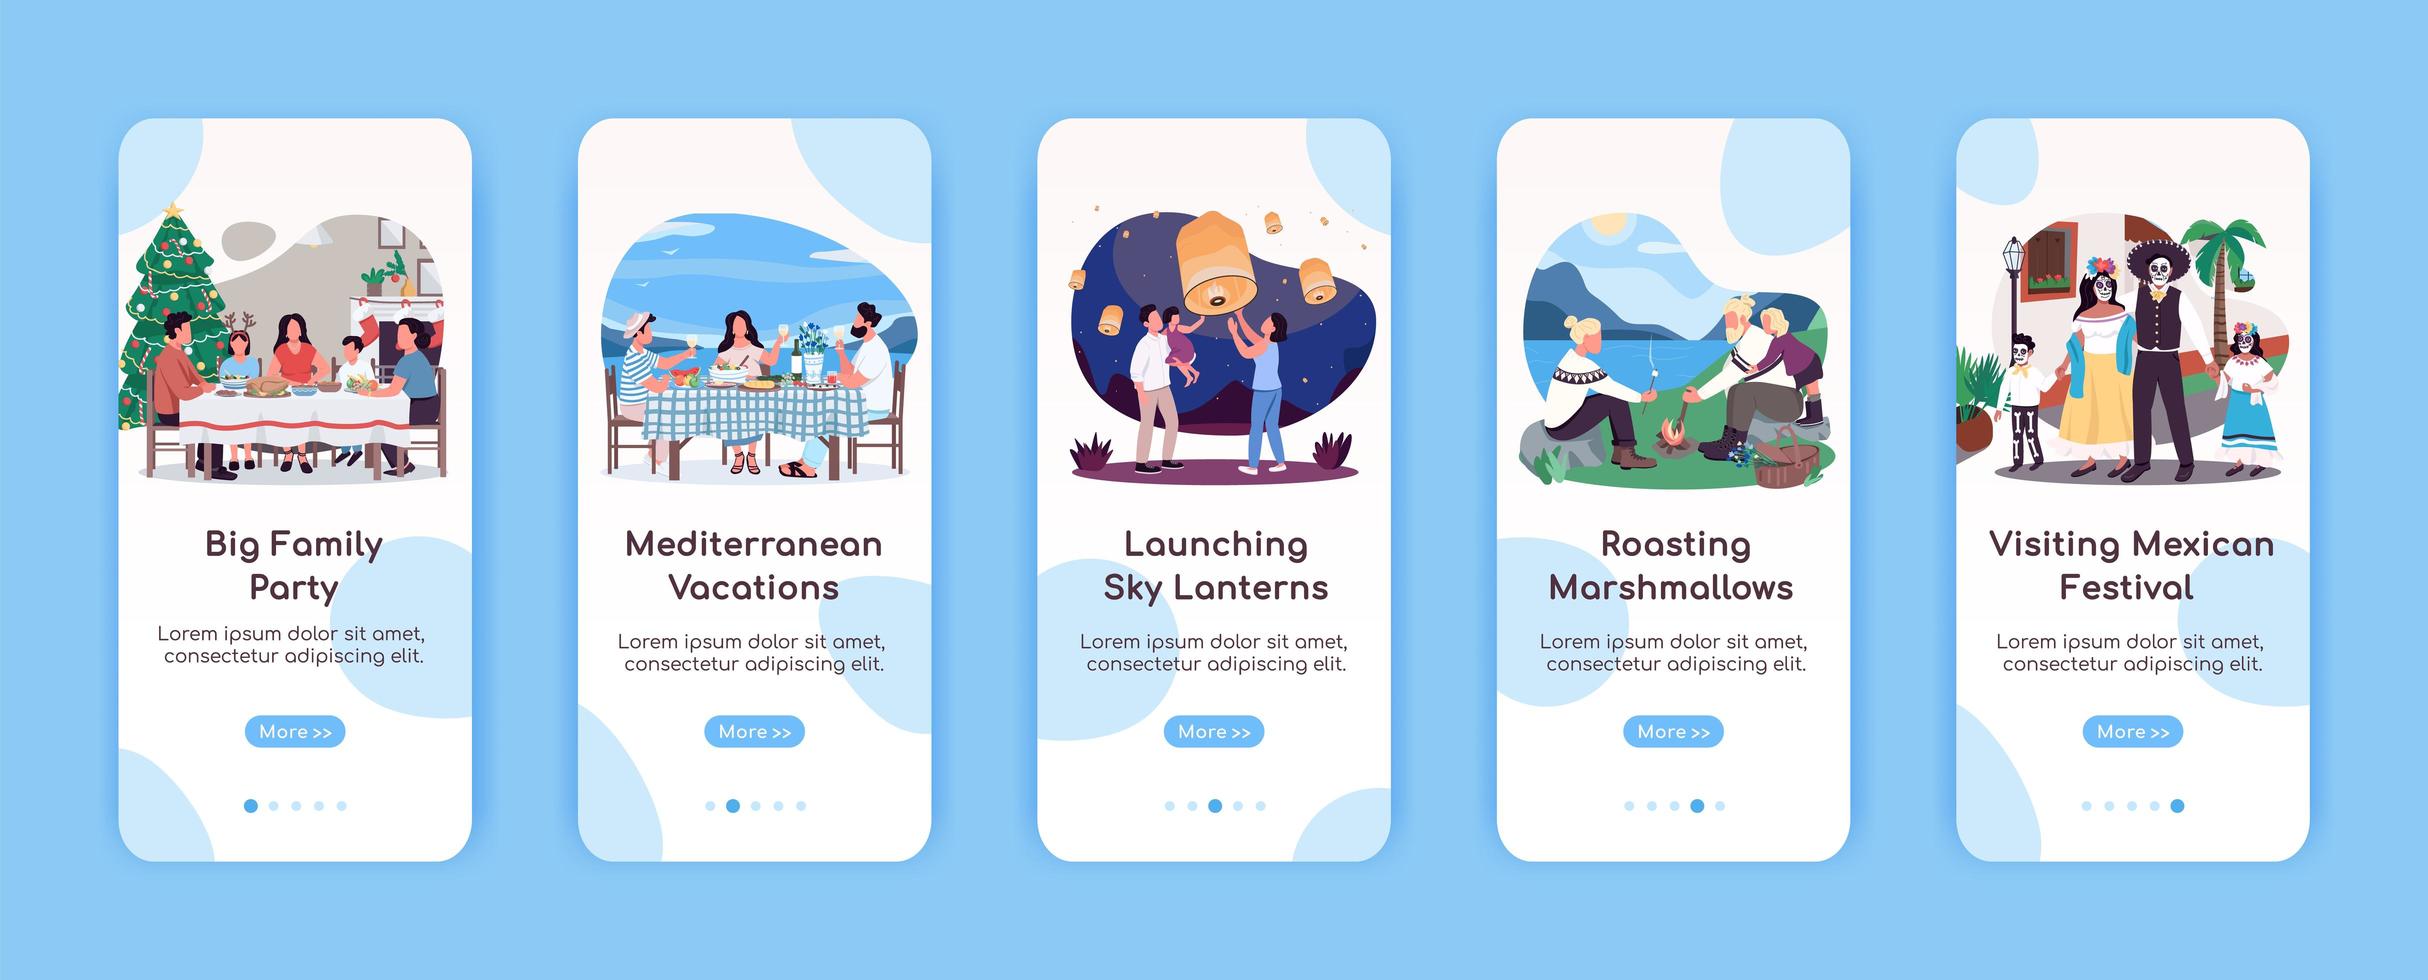 Quality family time onboarding mobile app screens vector